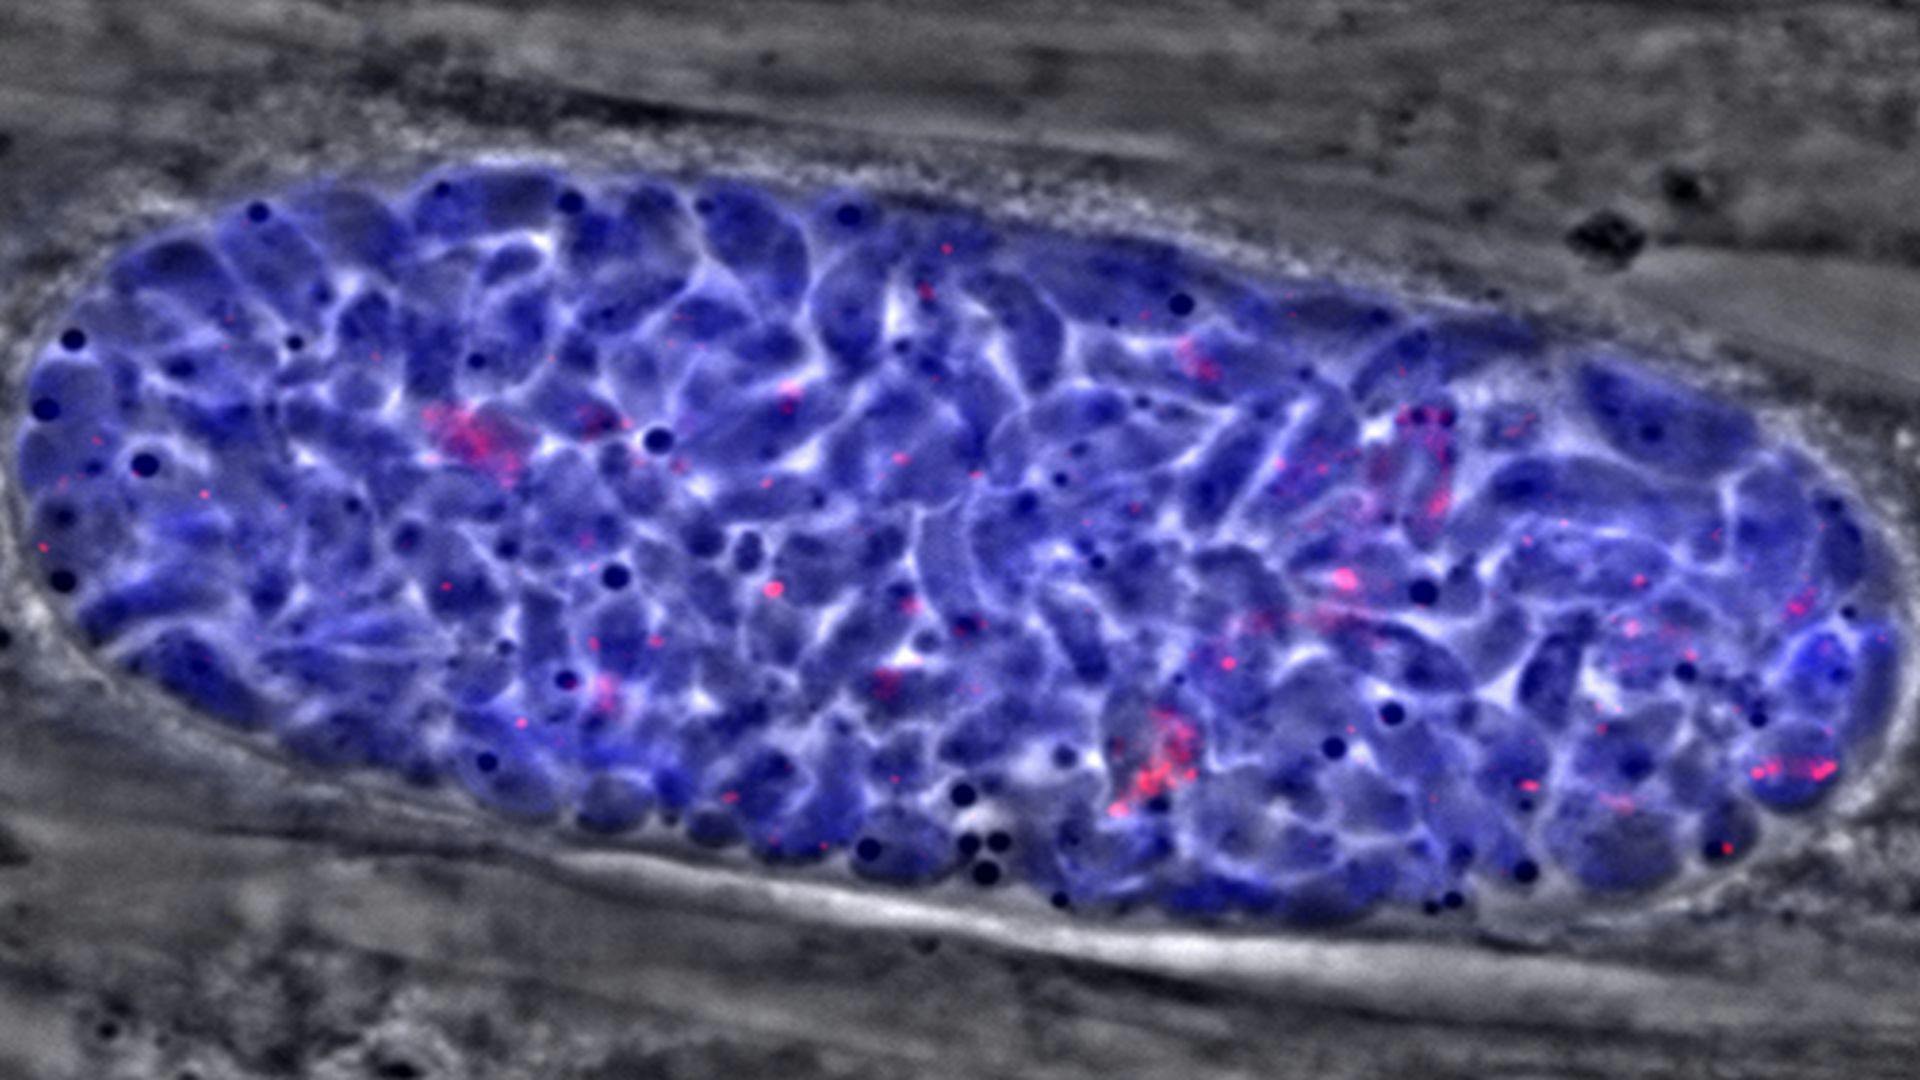 Stopping Toxoplasmosis Parasite Requires Interference With Digestion During Dormant Phase